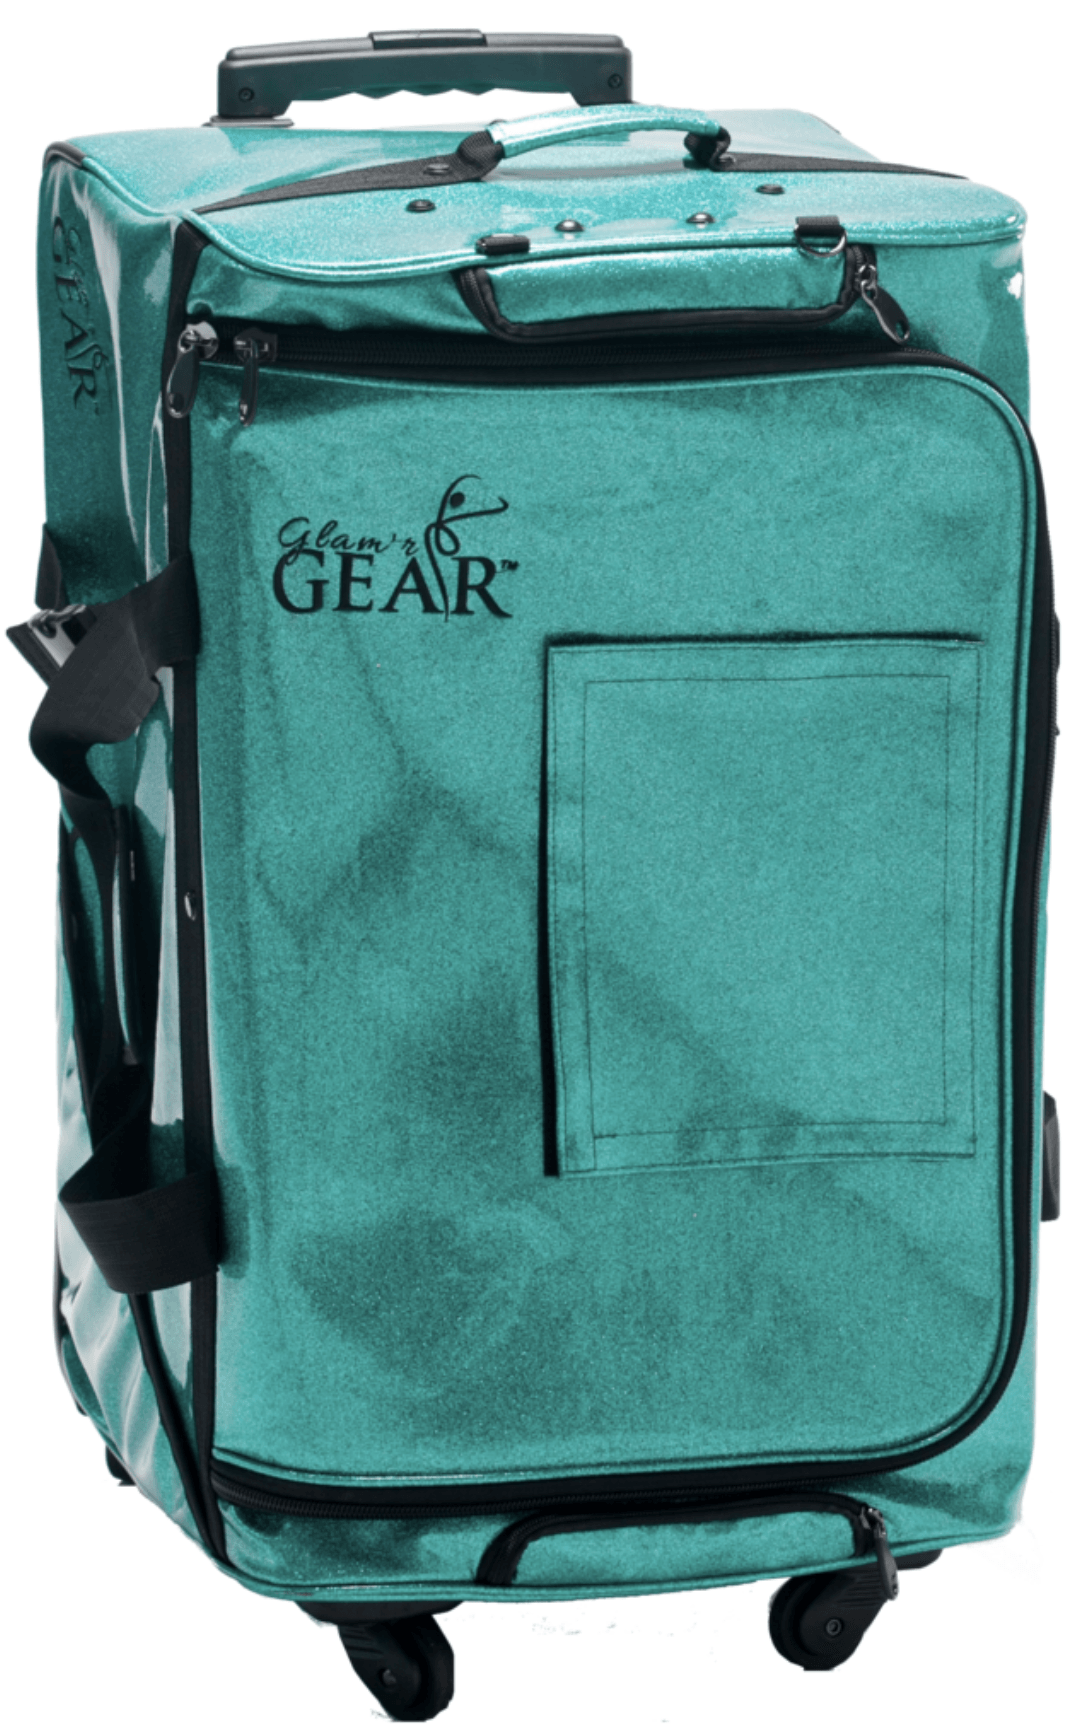 Glam'r Gear Changing Station Bag | Dance Competition Bag